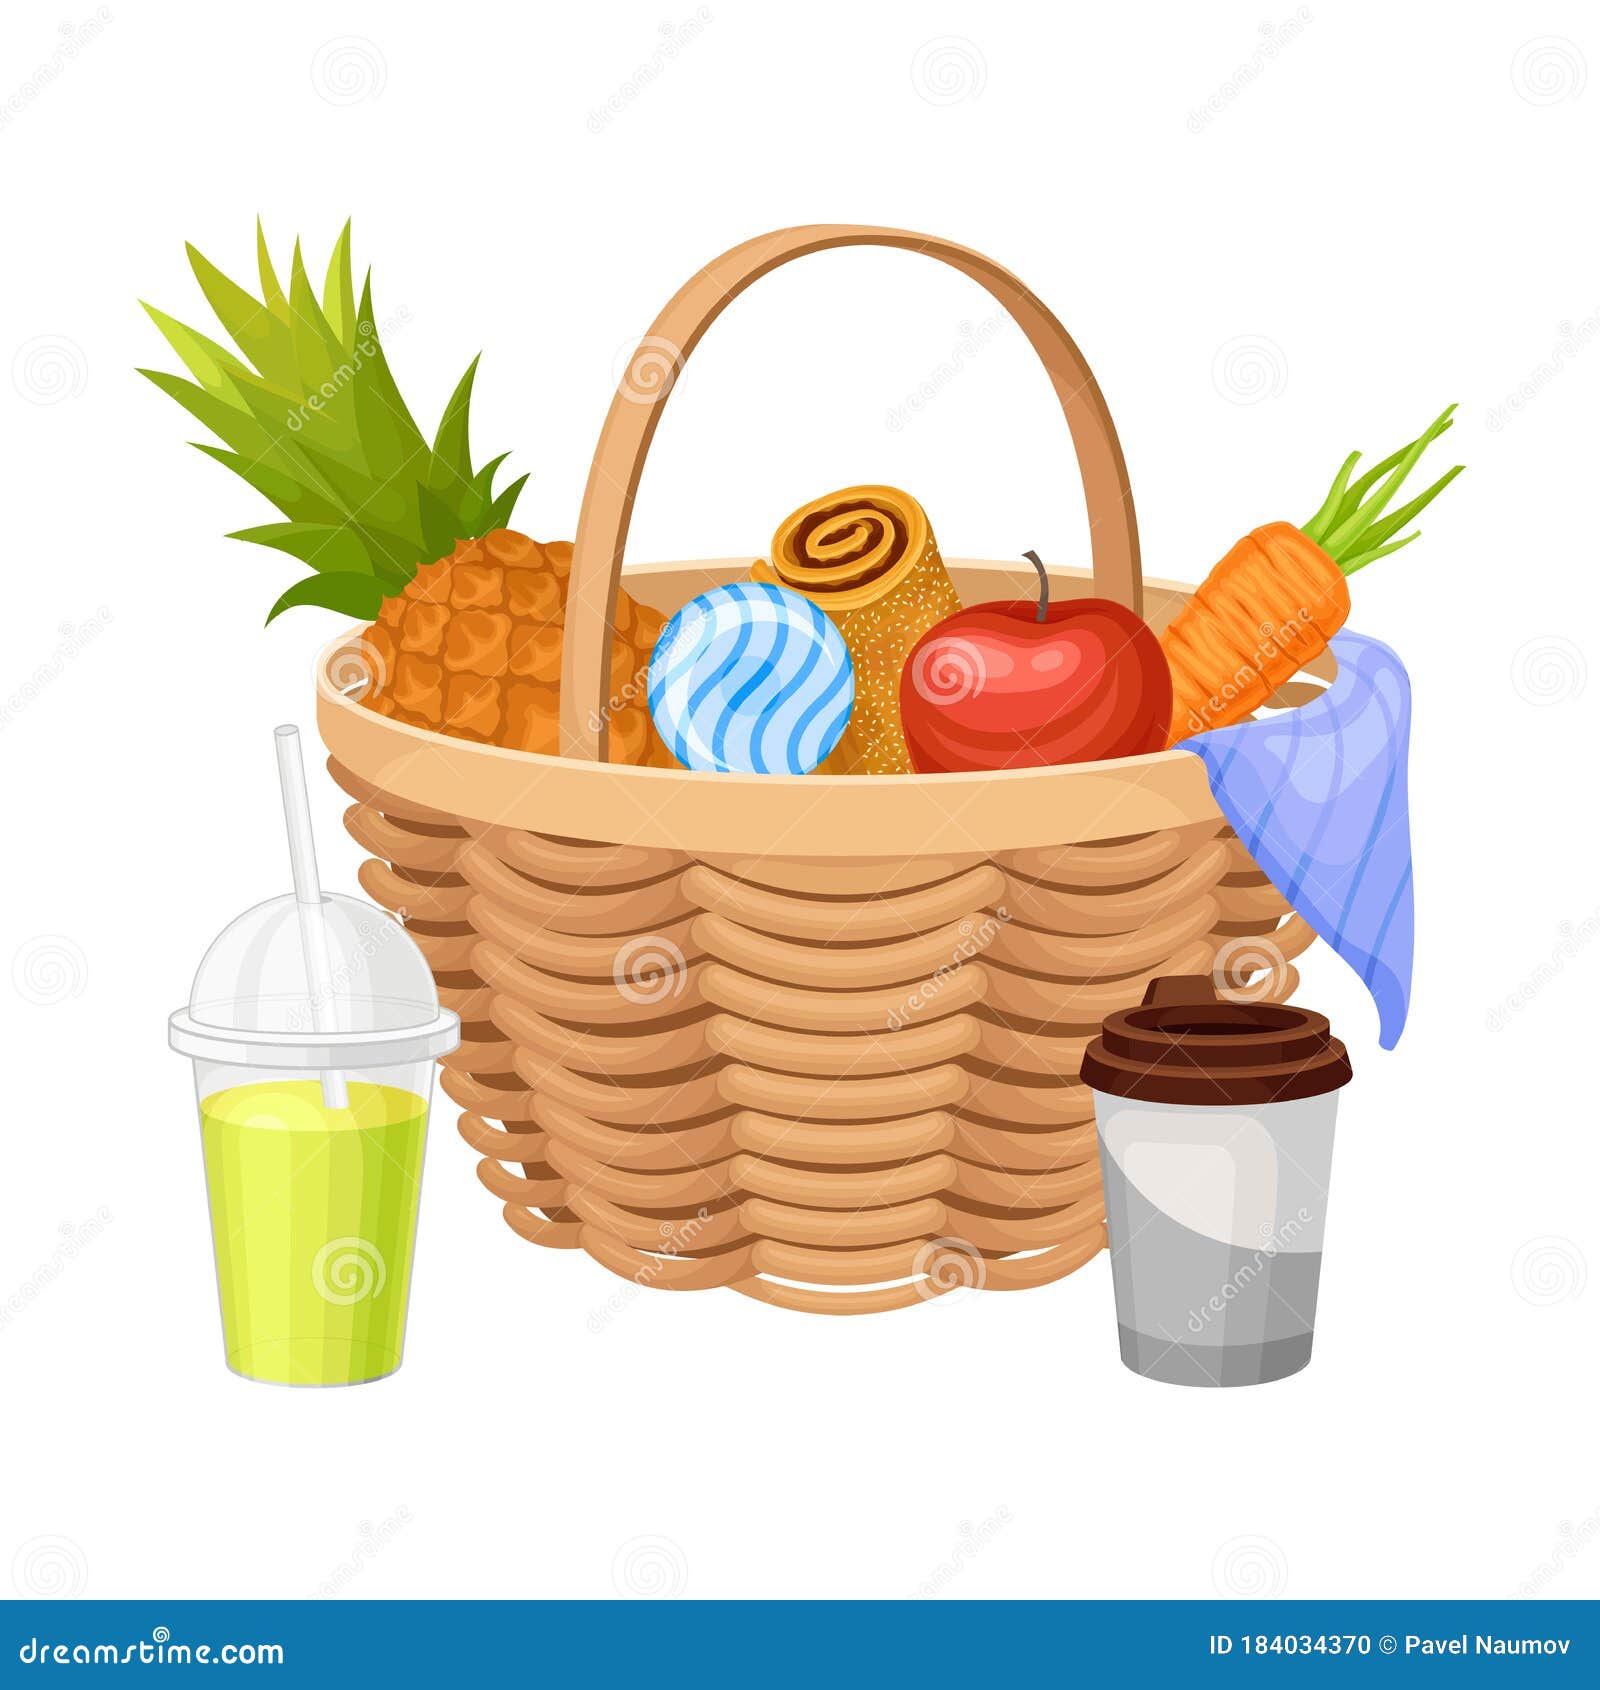 Picnic Wicker Hamper with Foodstuff for Eating Outdoors Vector ...